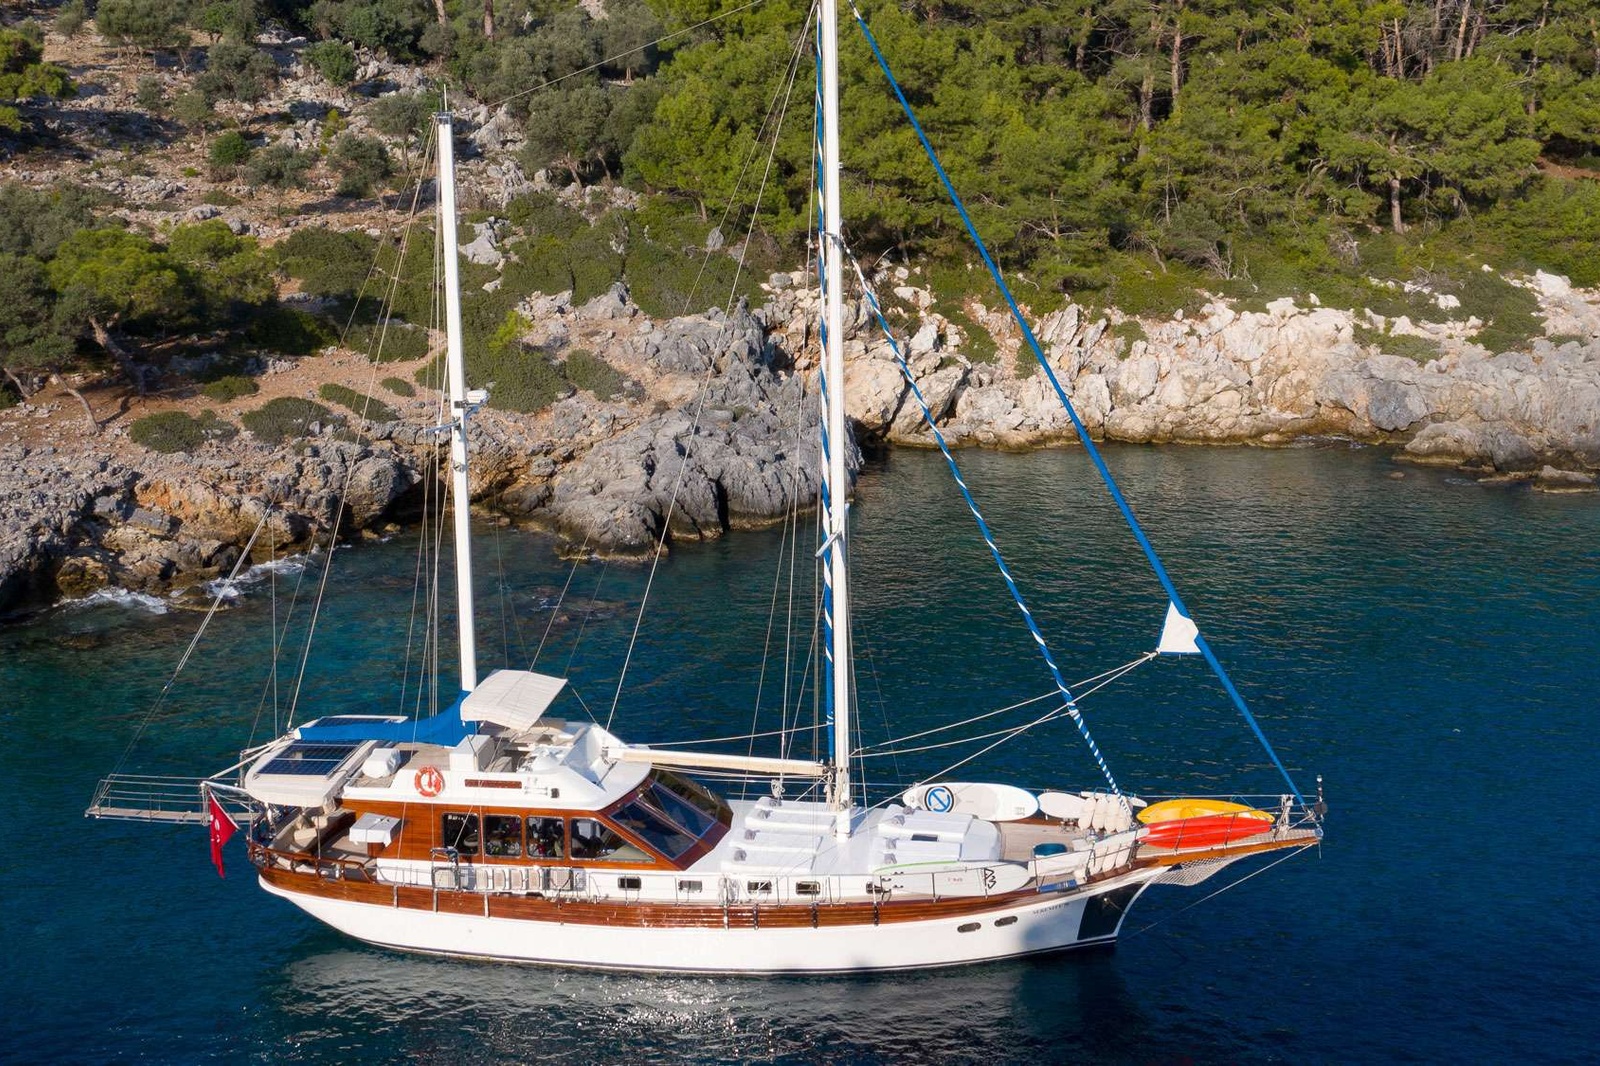 In current times when the industry is concentrating more and more on larger yachts, Serenity 70 is one of the few motor sailers that is available for charter in the East Med which is modest in size and budget without compromising on luxury and comfort. She has a very cosy honeymooner master cabin with a white interior and four portholes that flood in reflections from the sea. The remaining two double cabins are smaller in size and ideal for children or younger adults, though throughout her charter history this vessel has successfully accommodated six adults during many charters. Taking into consideration that guests will spend almost all their time outdoors, the limited space of the two double cabins is over shadowed by the comfortable aft dining area, inviting flybridge, ideal forward sun tanning area and the variety of amenities and water toys that you would normally only find aboard much larger vessels. The salon is very functional and includes a traditionally designed bar area with high seats facing panoramic views of the outside that is just perfect for enjoying an evening drink with friends and crew.